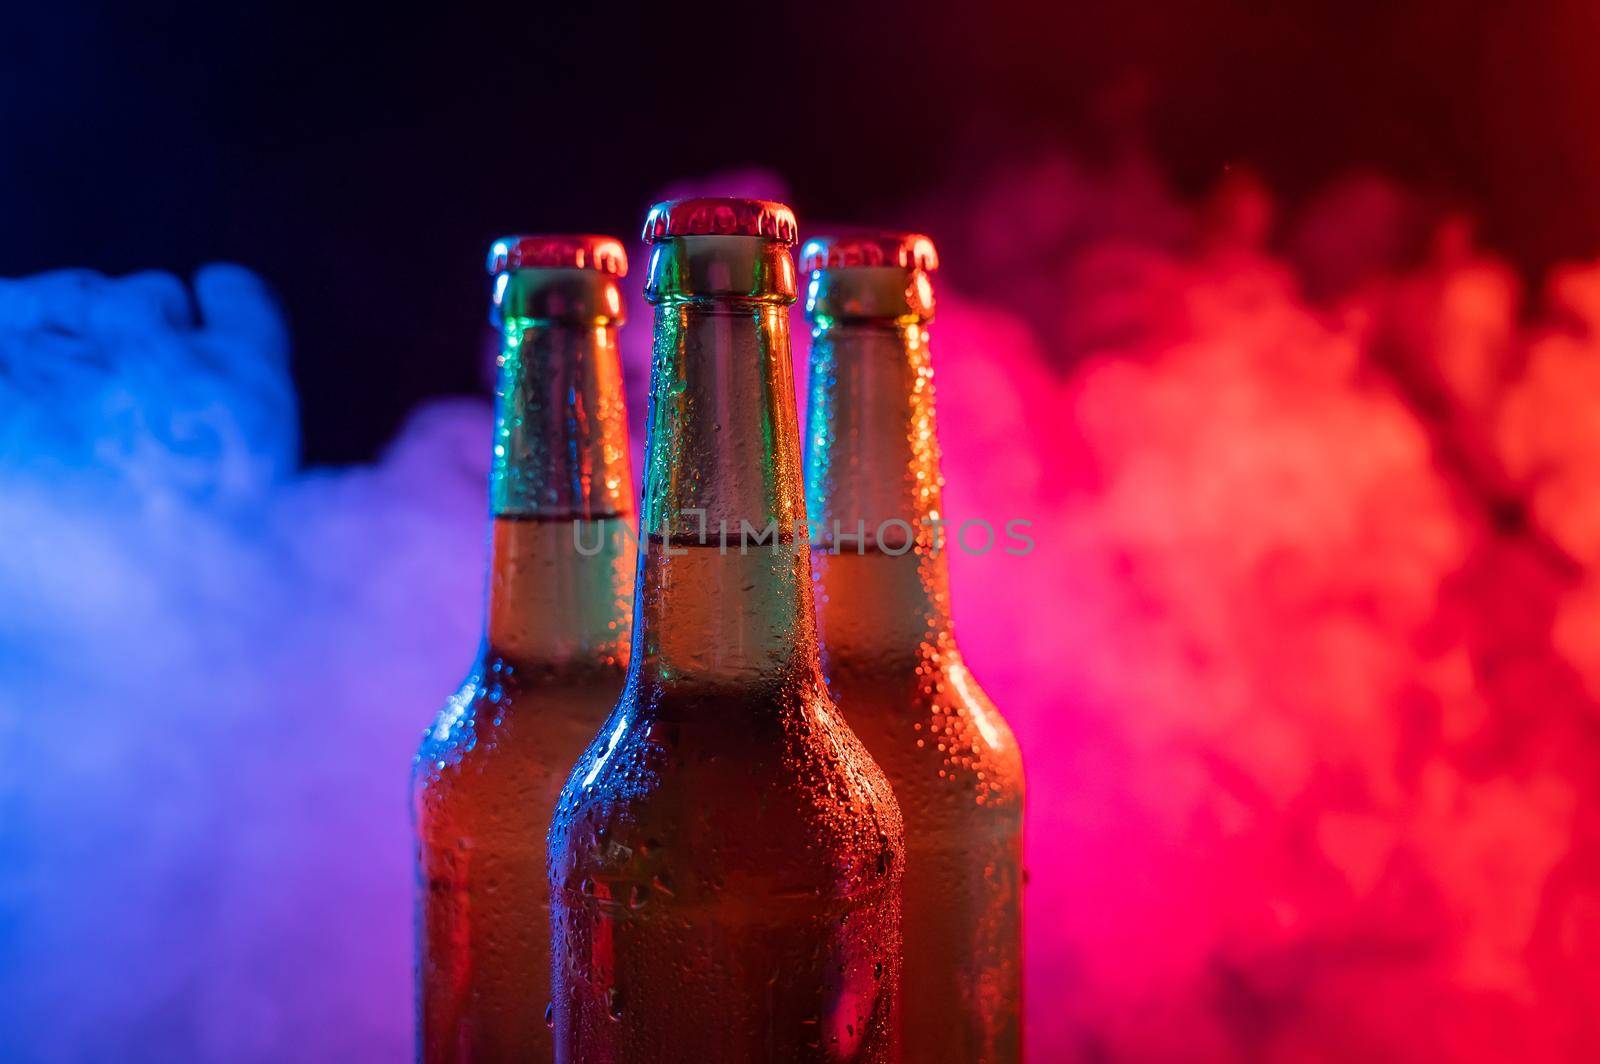 Three bottles of beer in a blue-pink mist. by mrwed54